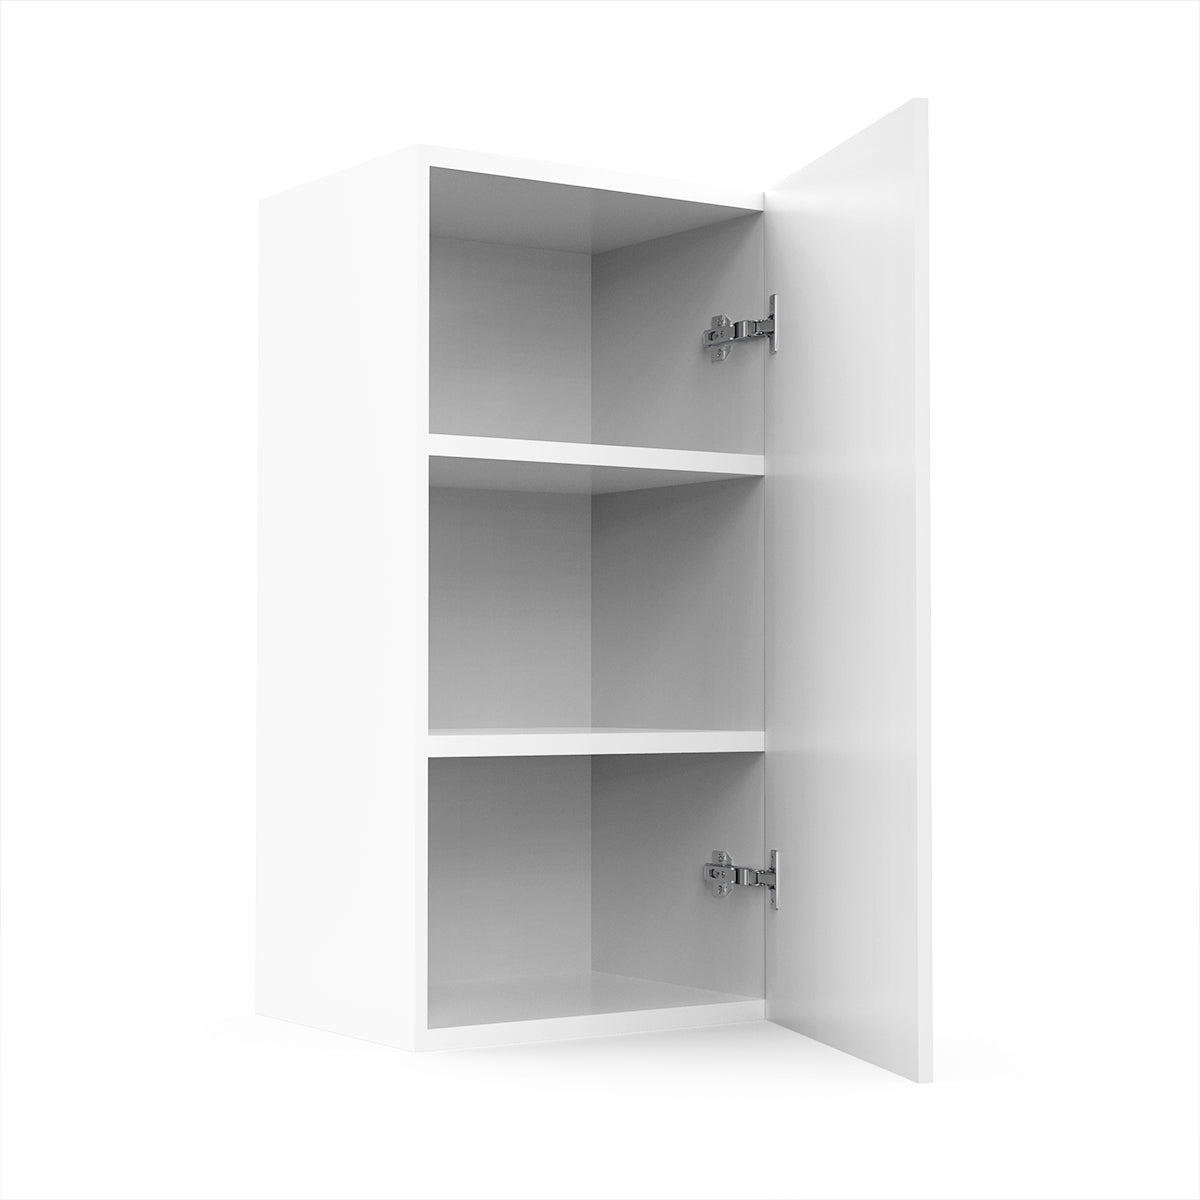 RTA - Glossy White - Single Door Wall Cabinets | 15"W x 30"H x 12"D